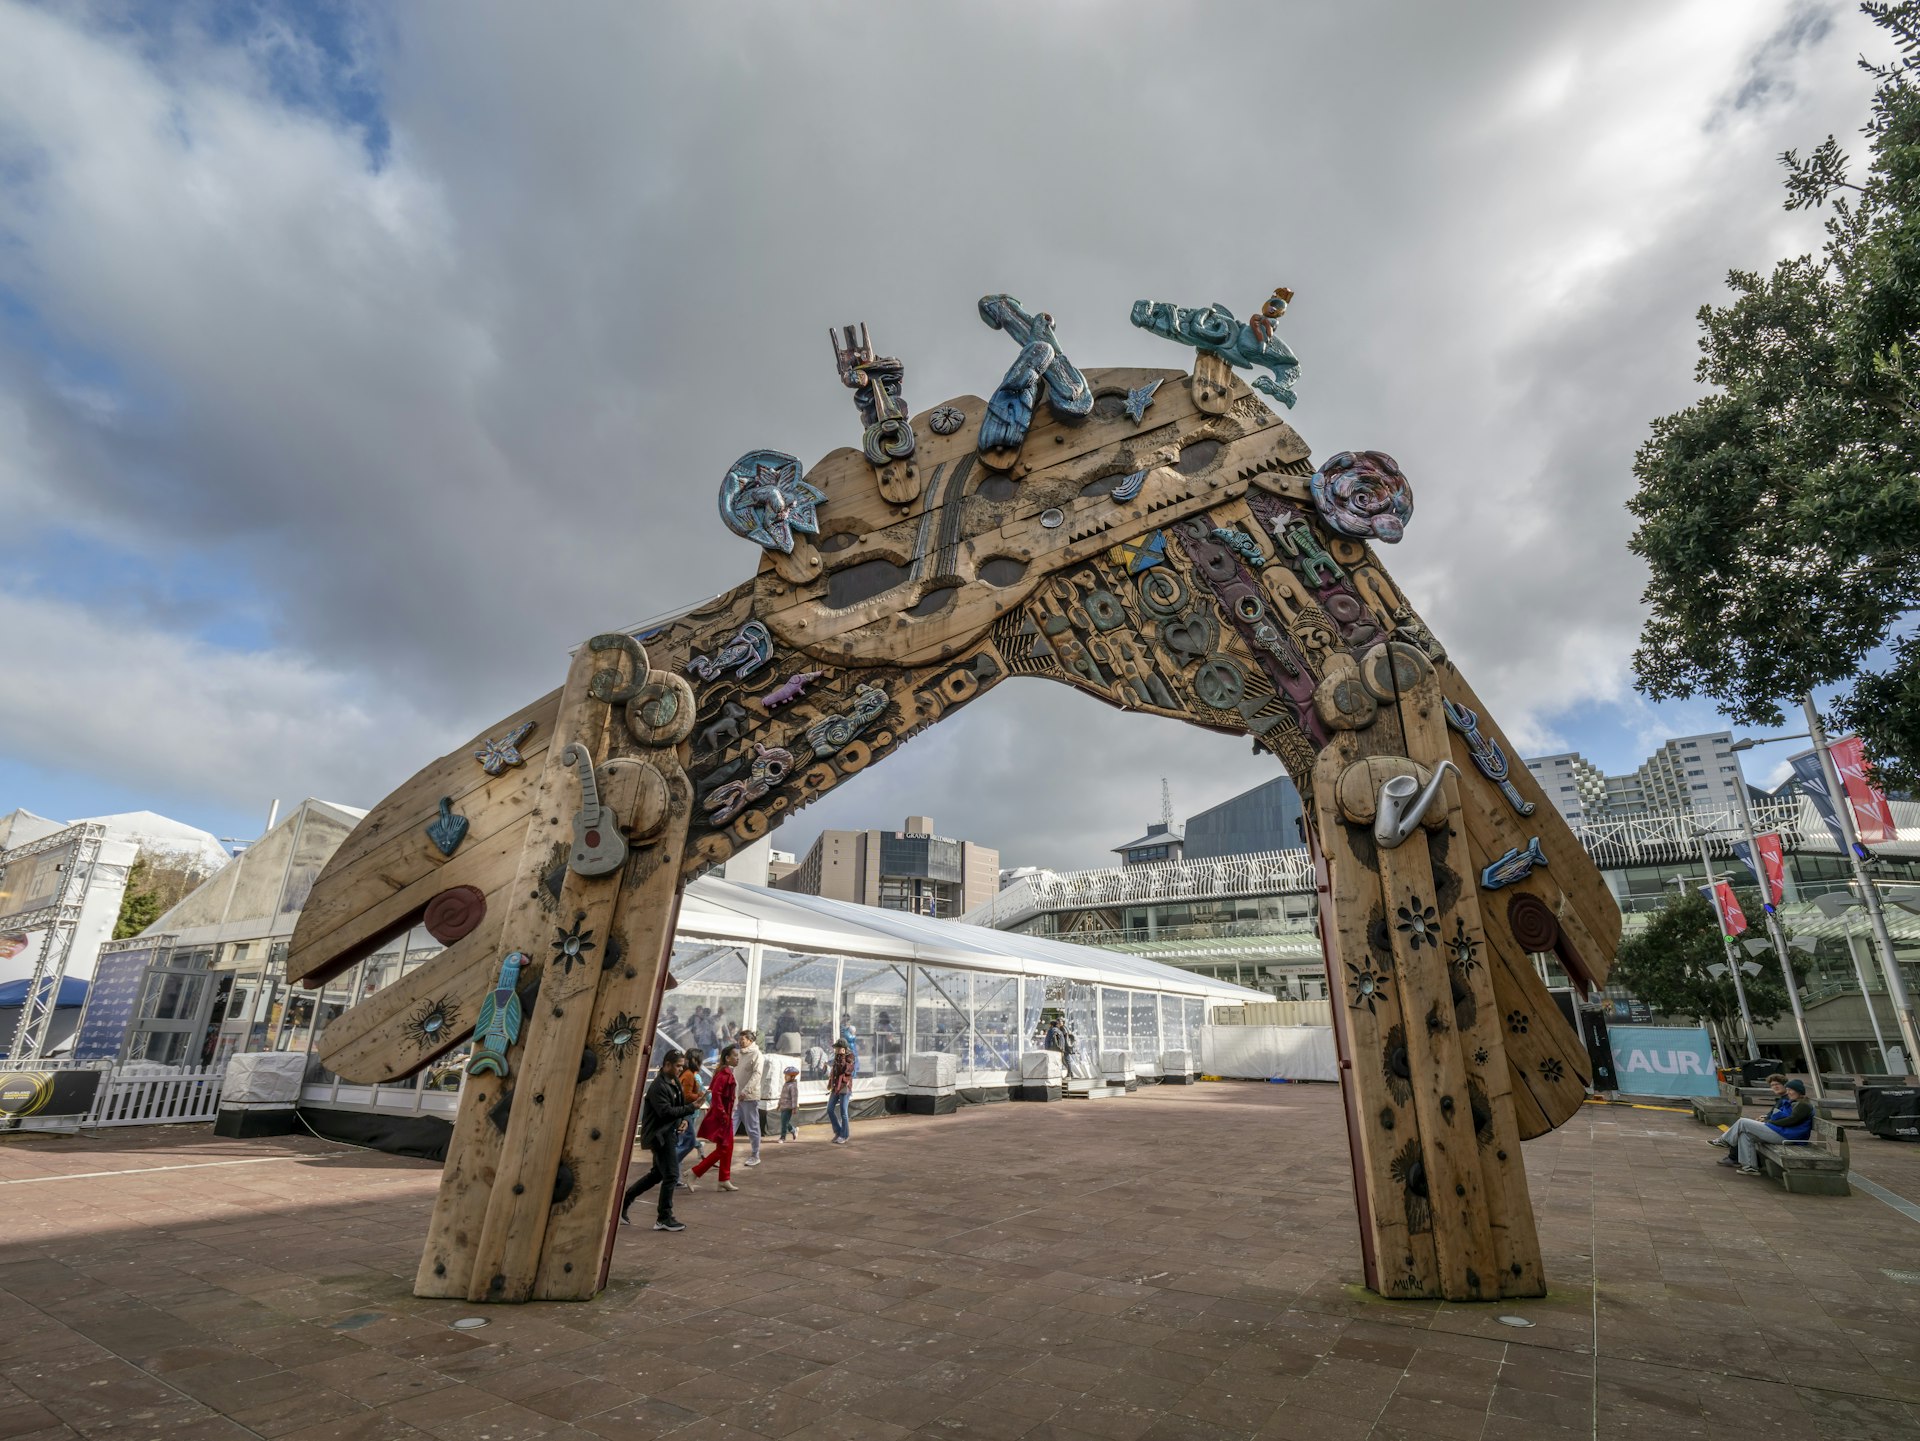 An arch/gateway with Maori art on Aotea Square, Auckland, New Zealand